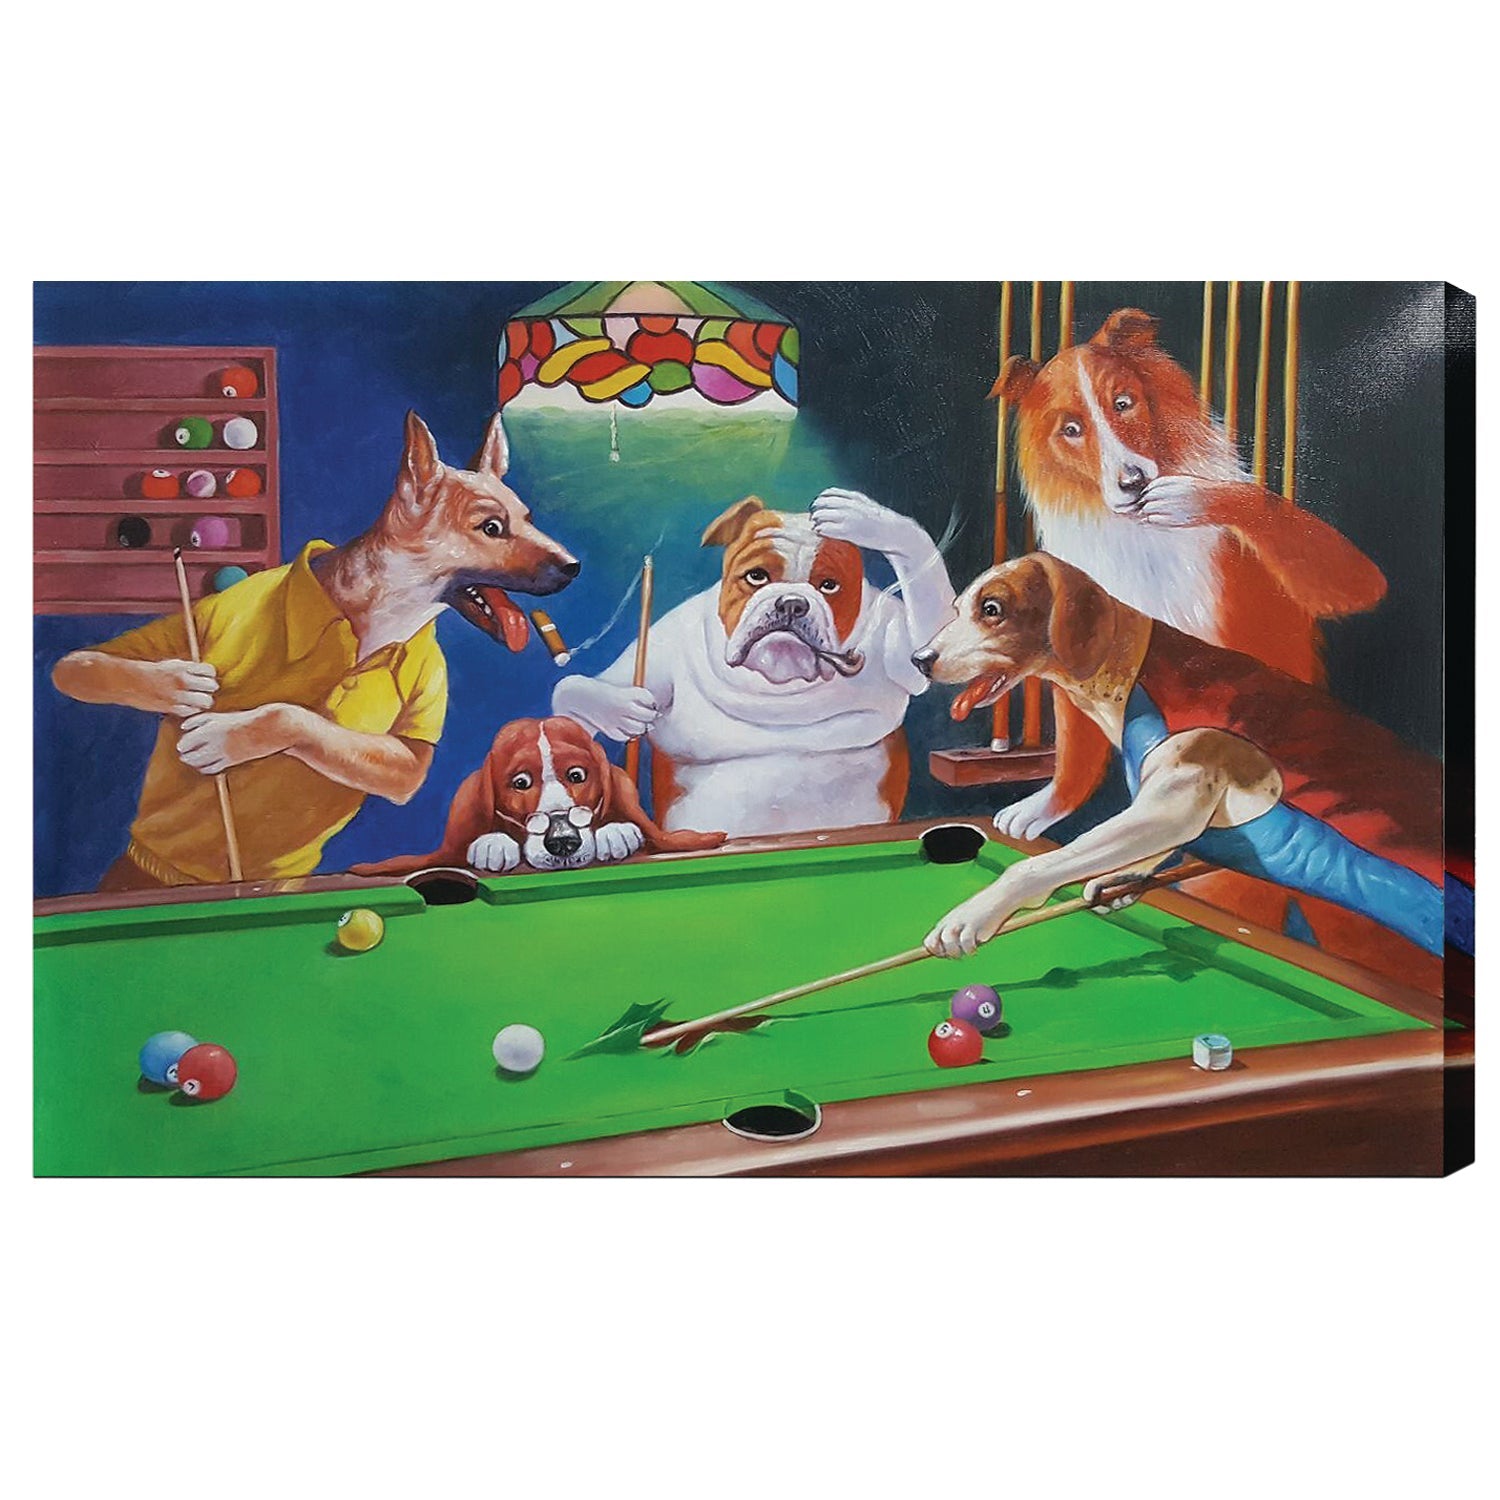 OIL PAINTING ON CANVAS - JACK THE RIPPER-Game Table Genie